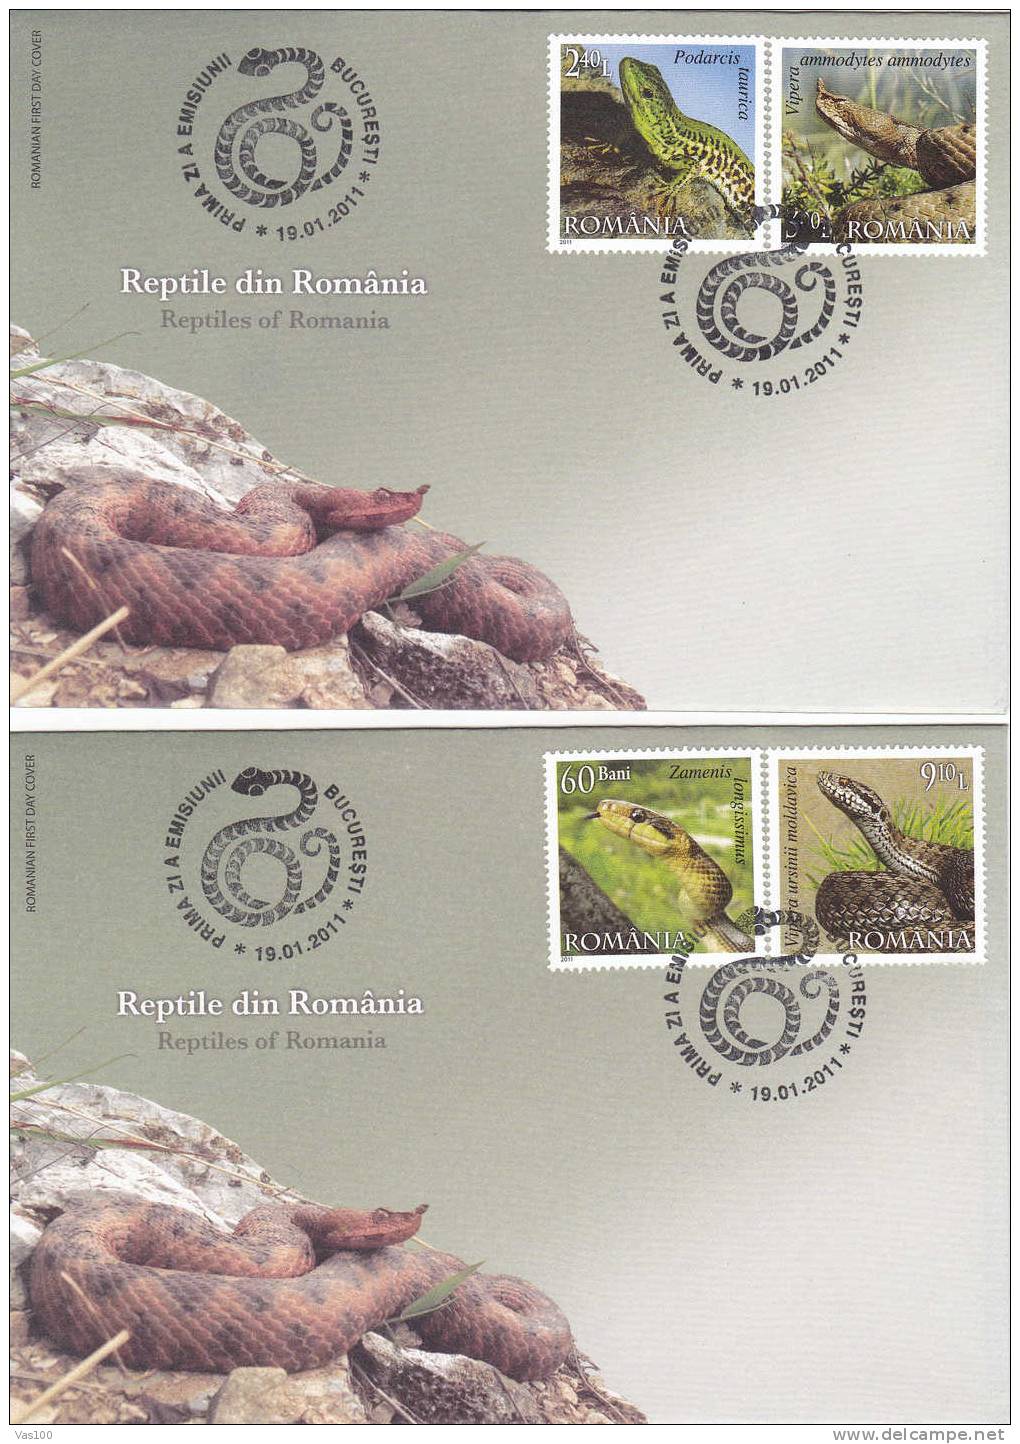 Reptiles;snake,wall Lizard,horned Viper And Meadow Viper 2011 Covers FDC 2X,Romania News! - Snakes